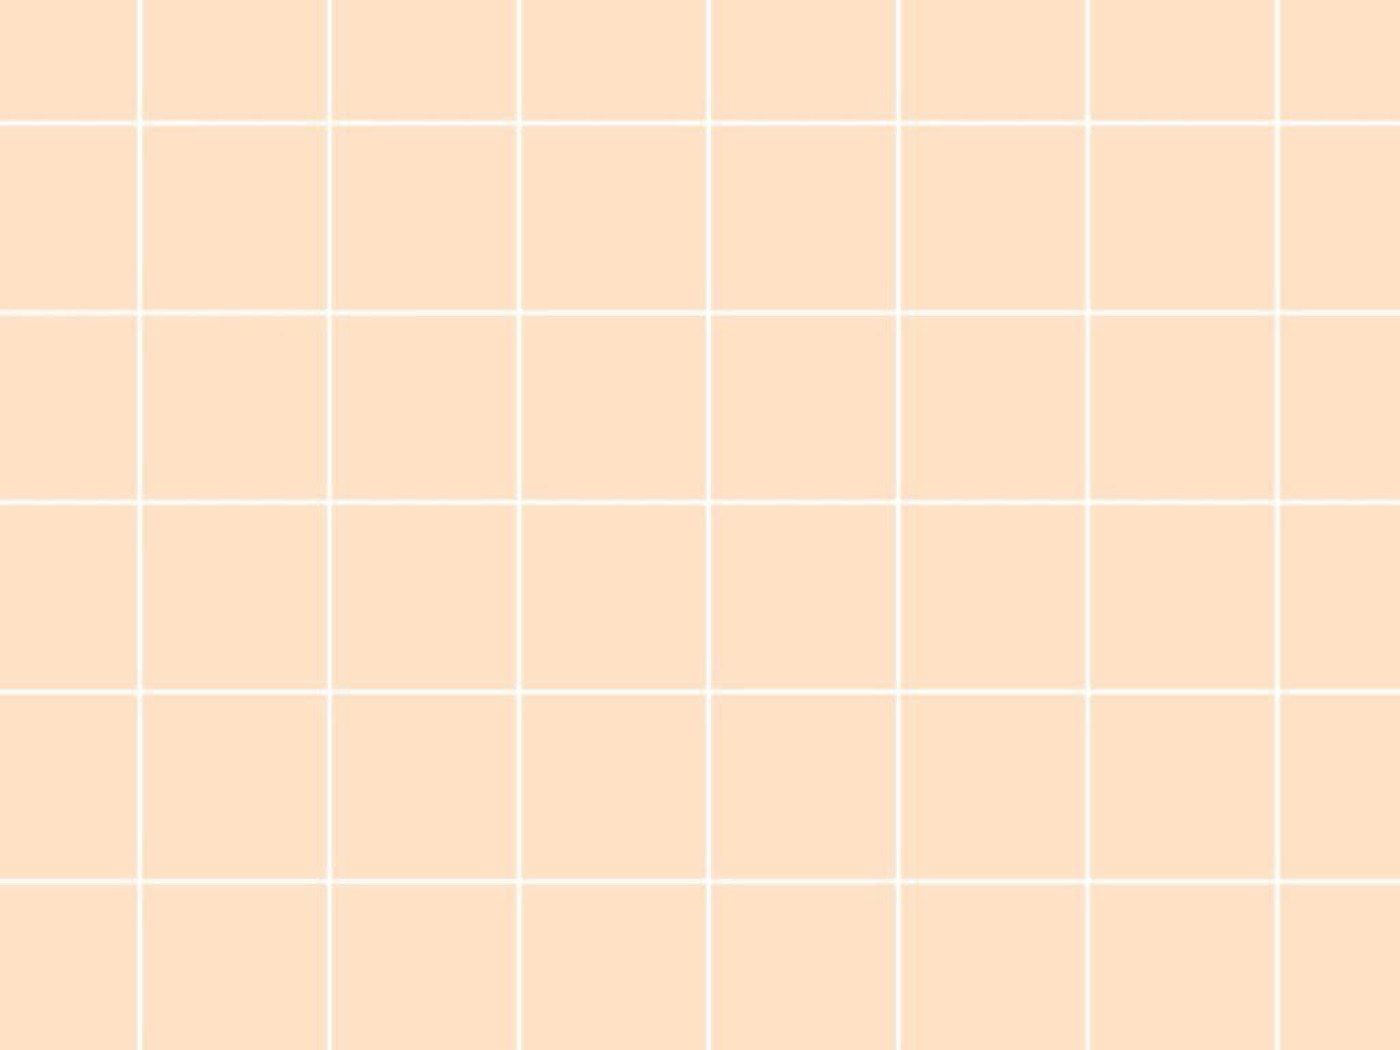 Peach background with white grid lines - Peach